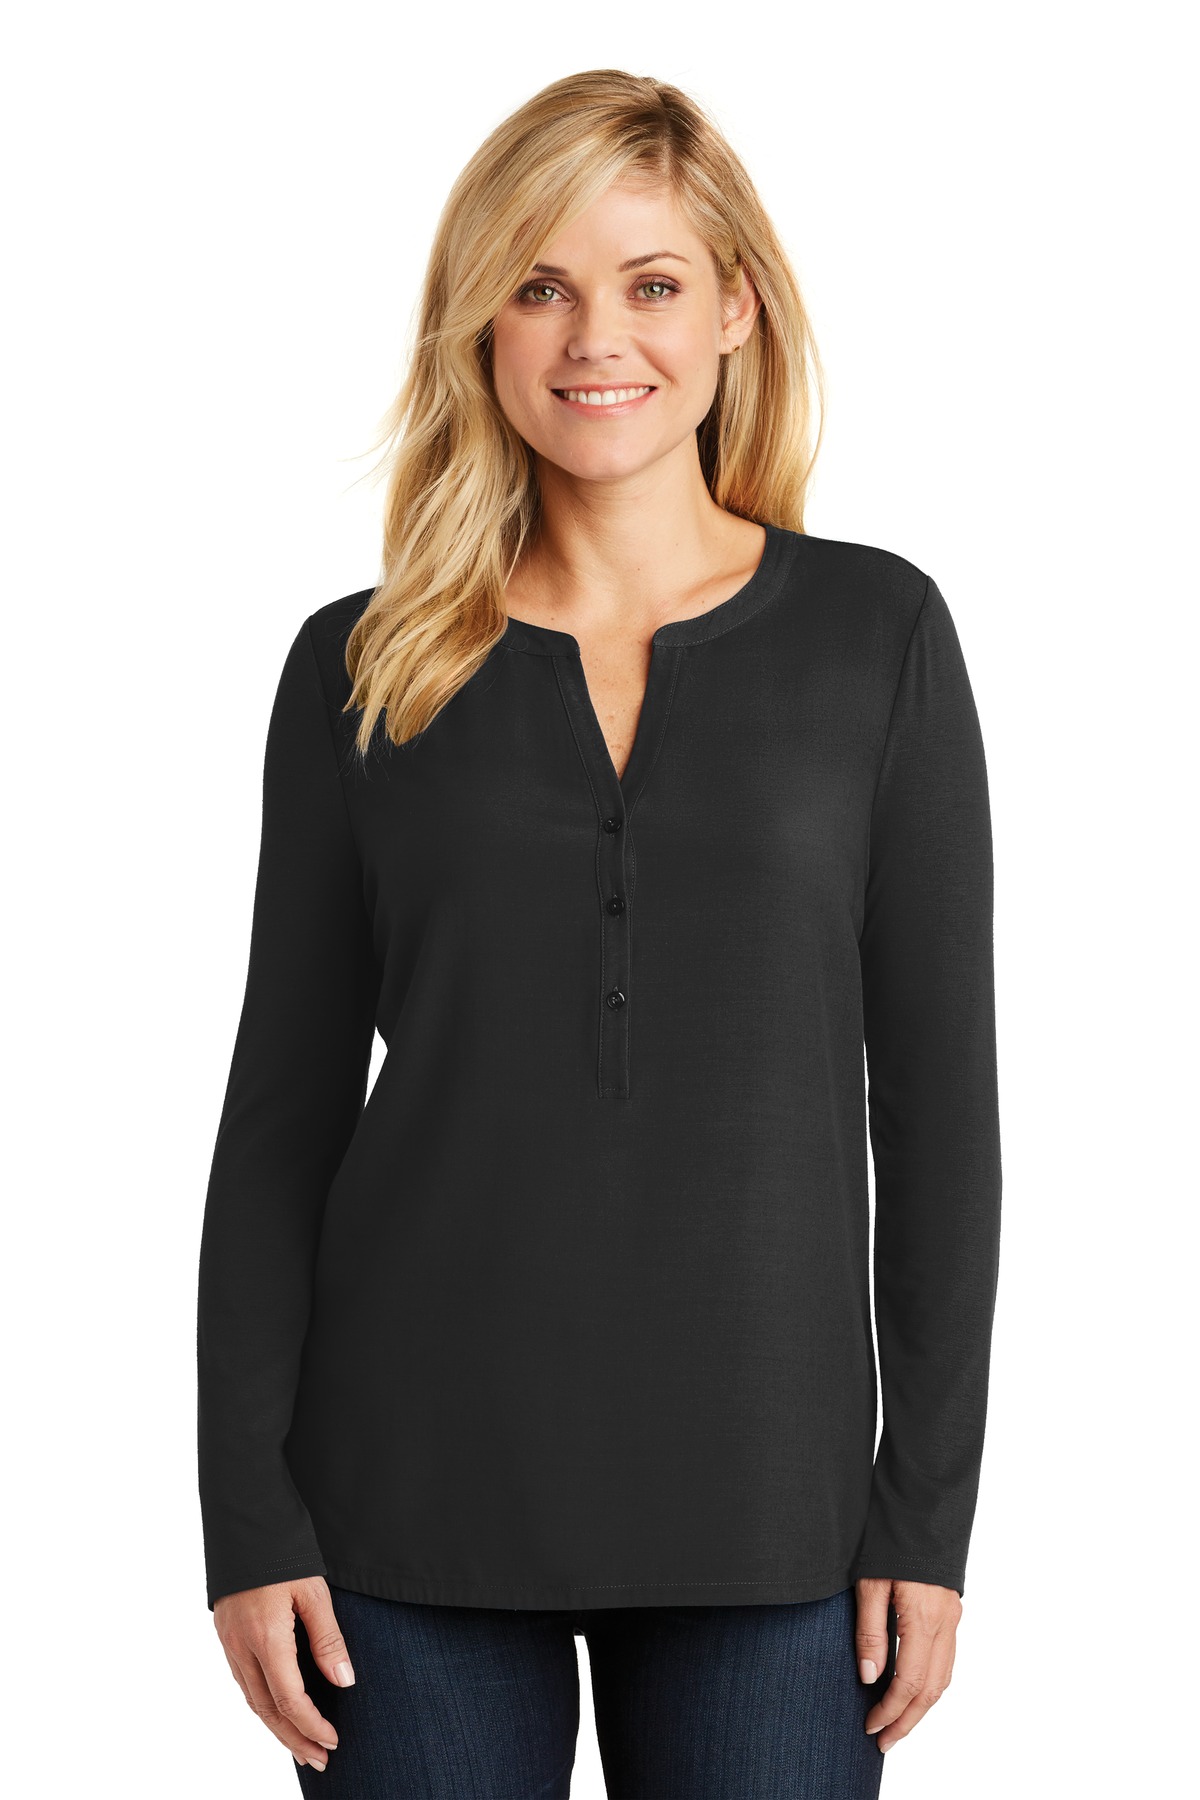 Port Authority Ladies Hospitality Polos & Knits ® Ladies Concept Henley Tunic.-Port Authority